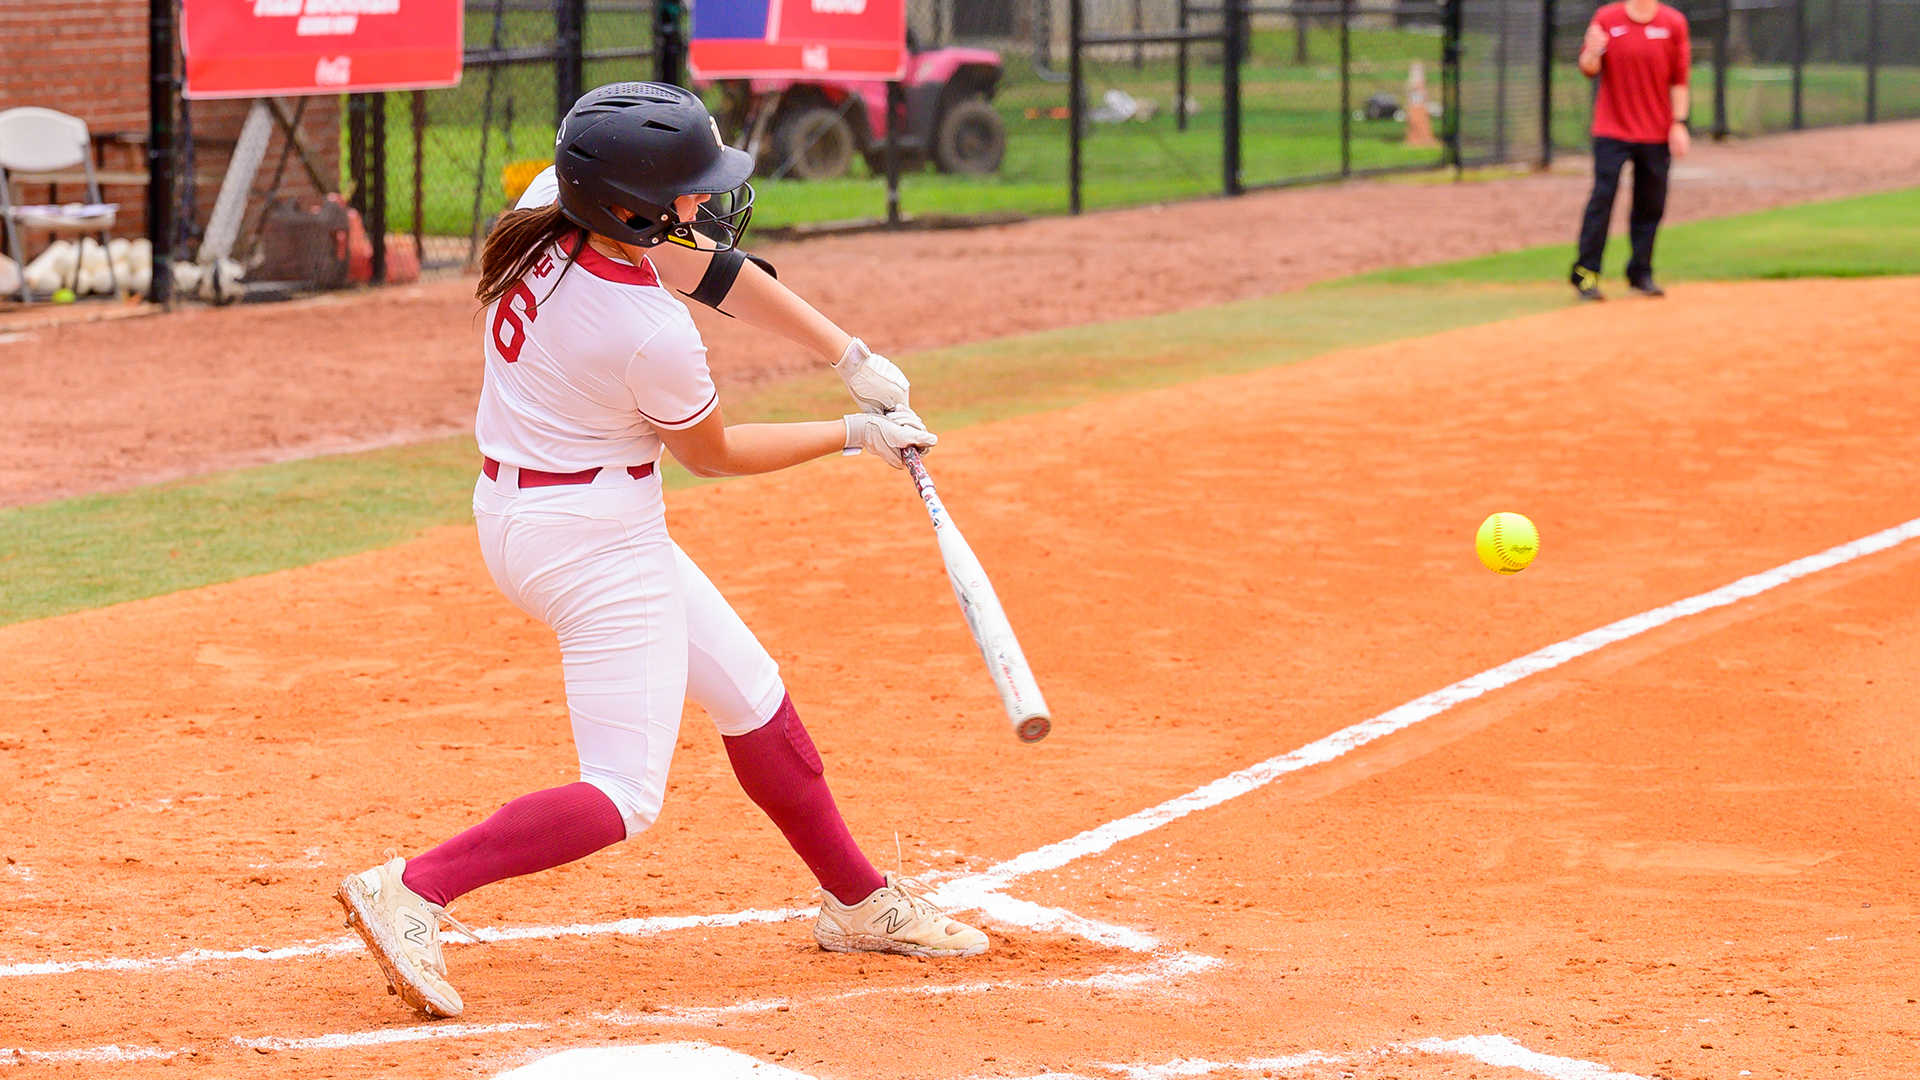 Kendall Brown had an RBI double in the fourth innings to help lift IU Southeast to a 1-0 victory over Reinhardt in an elimination game in the Hattiesburg Bracket.